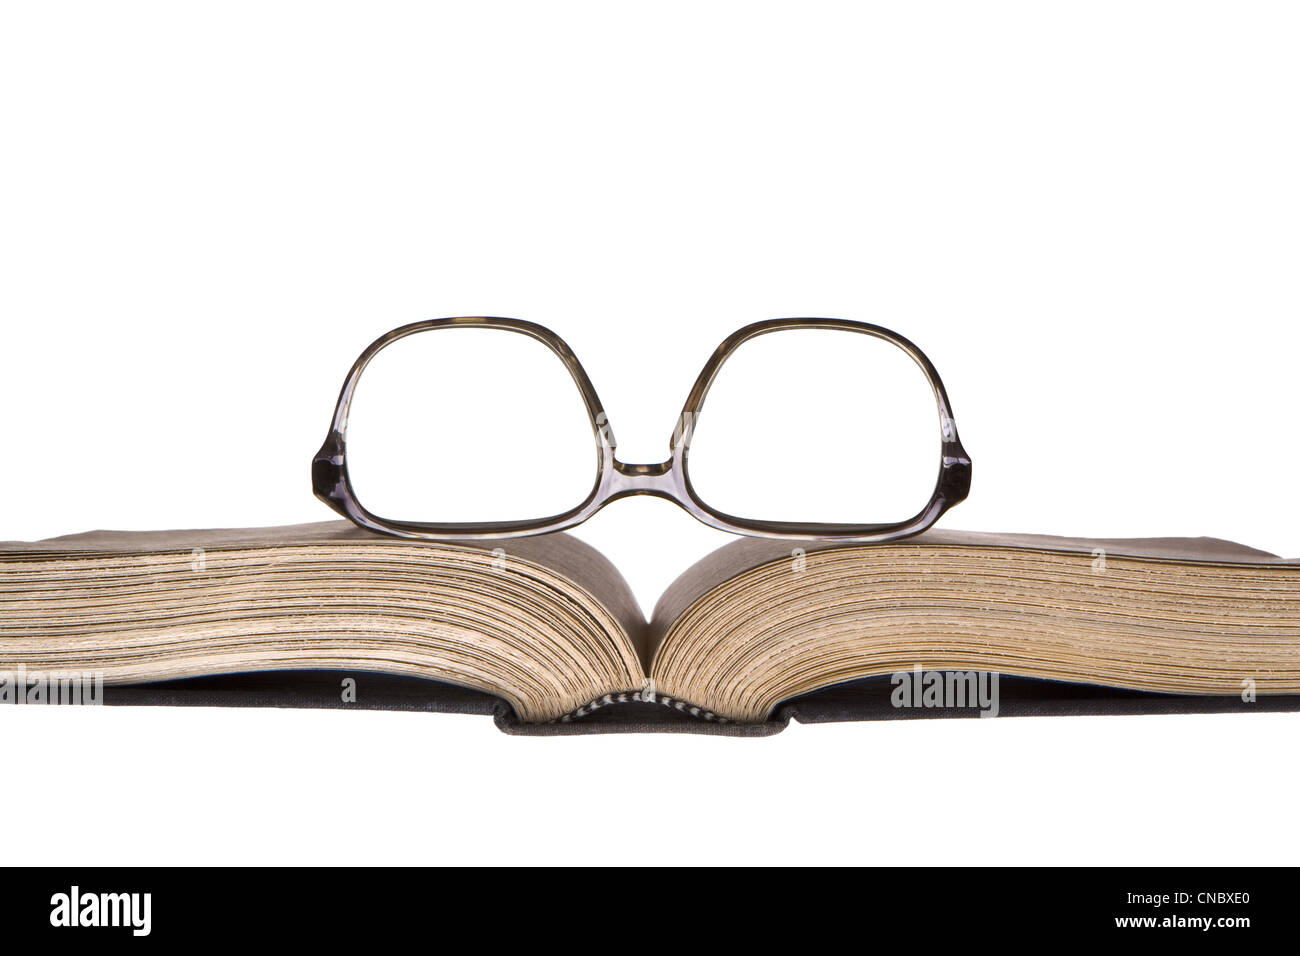 Old, upside-down eye glasses in plastic frame resting on old, yellowed open book. Frontal horizontal view. Isolated on white. Stock Photo